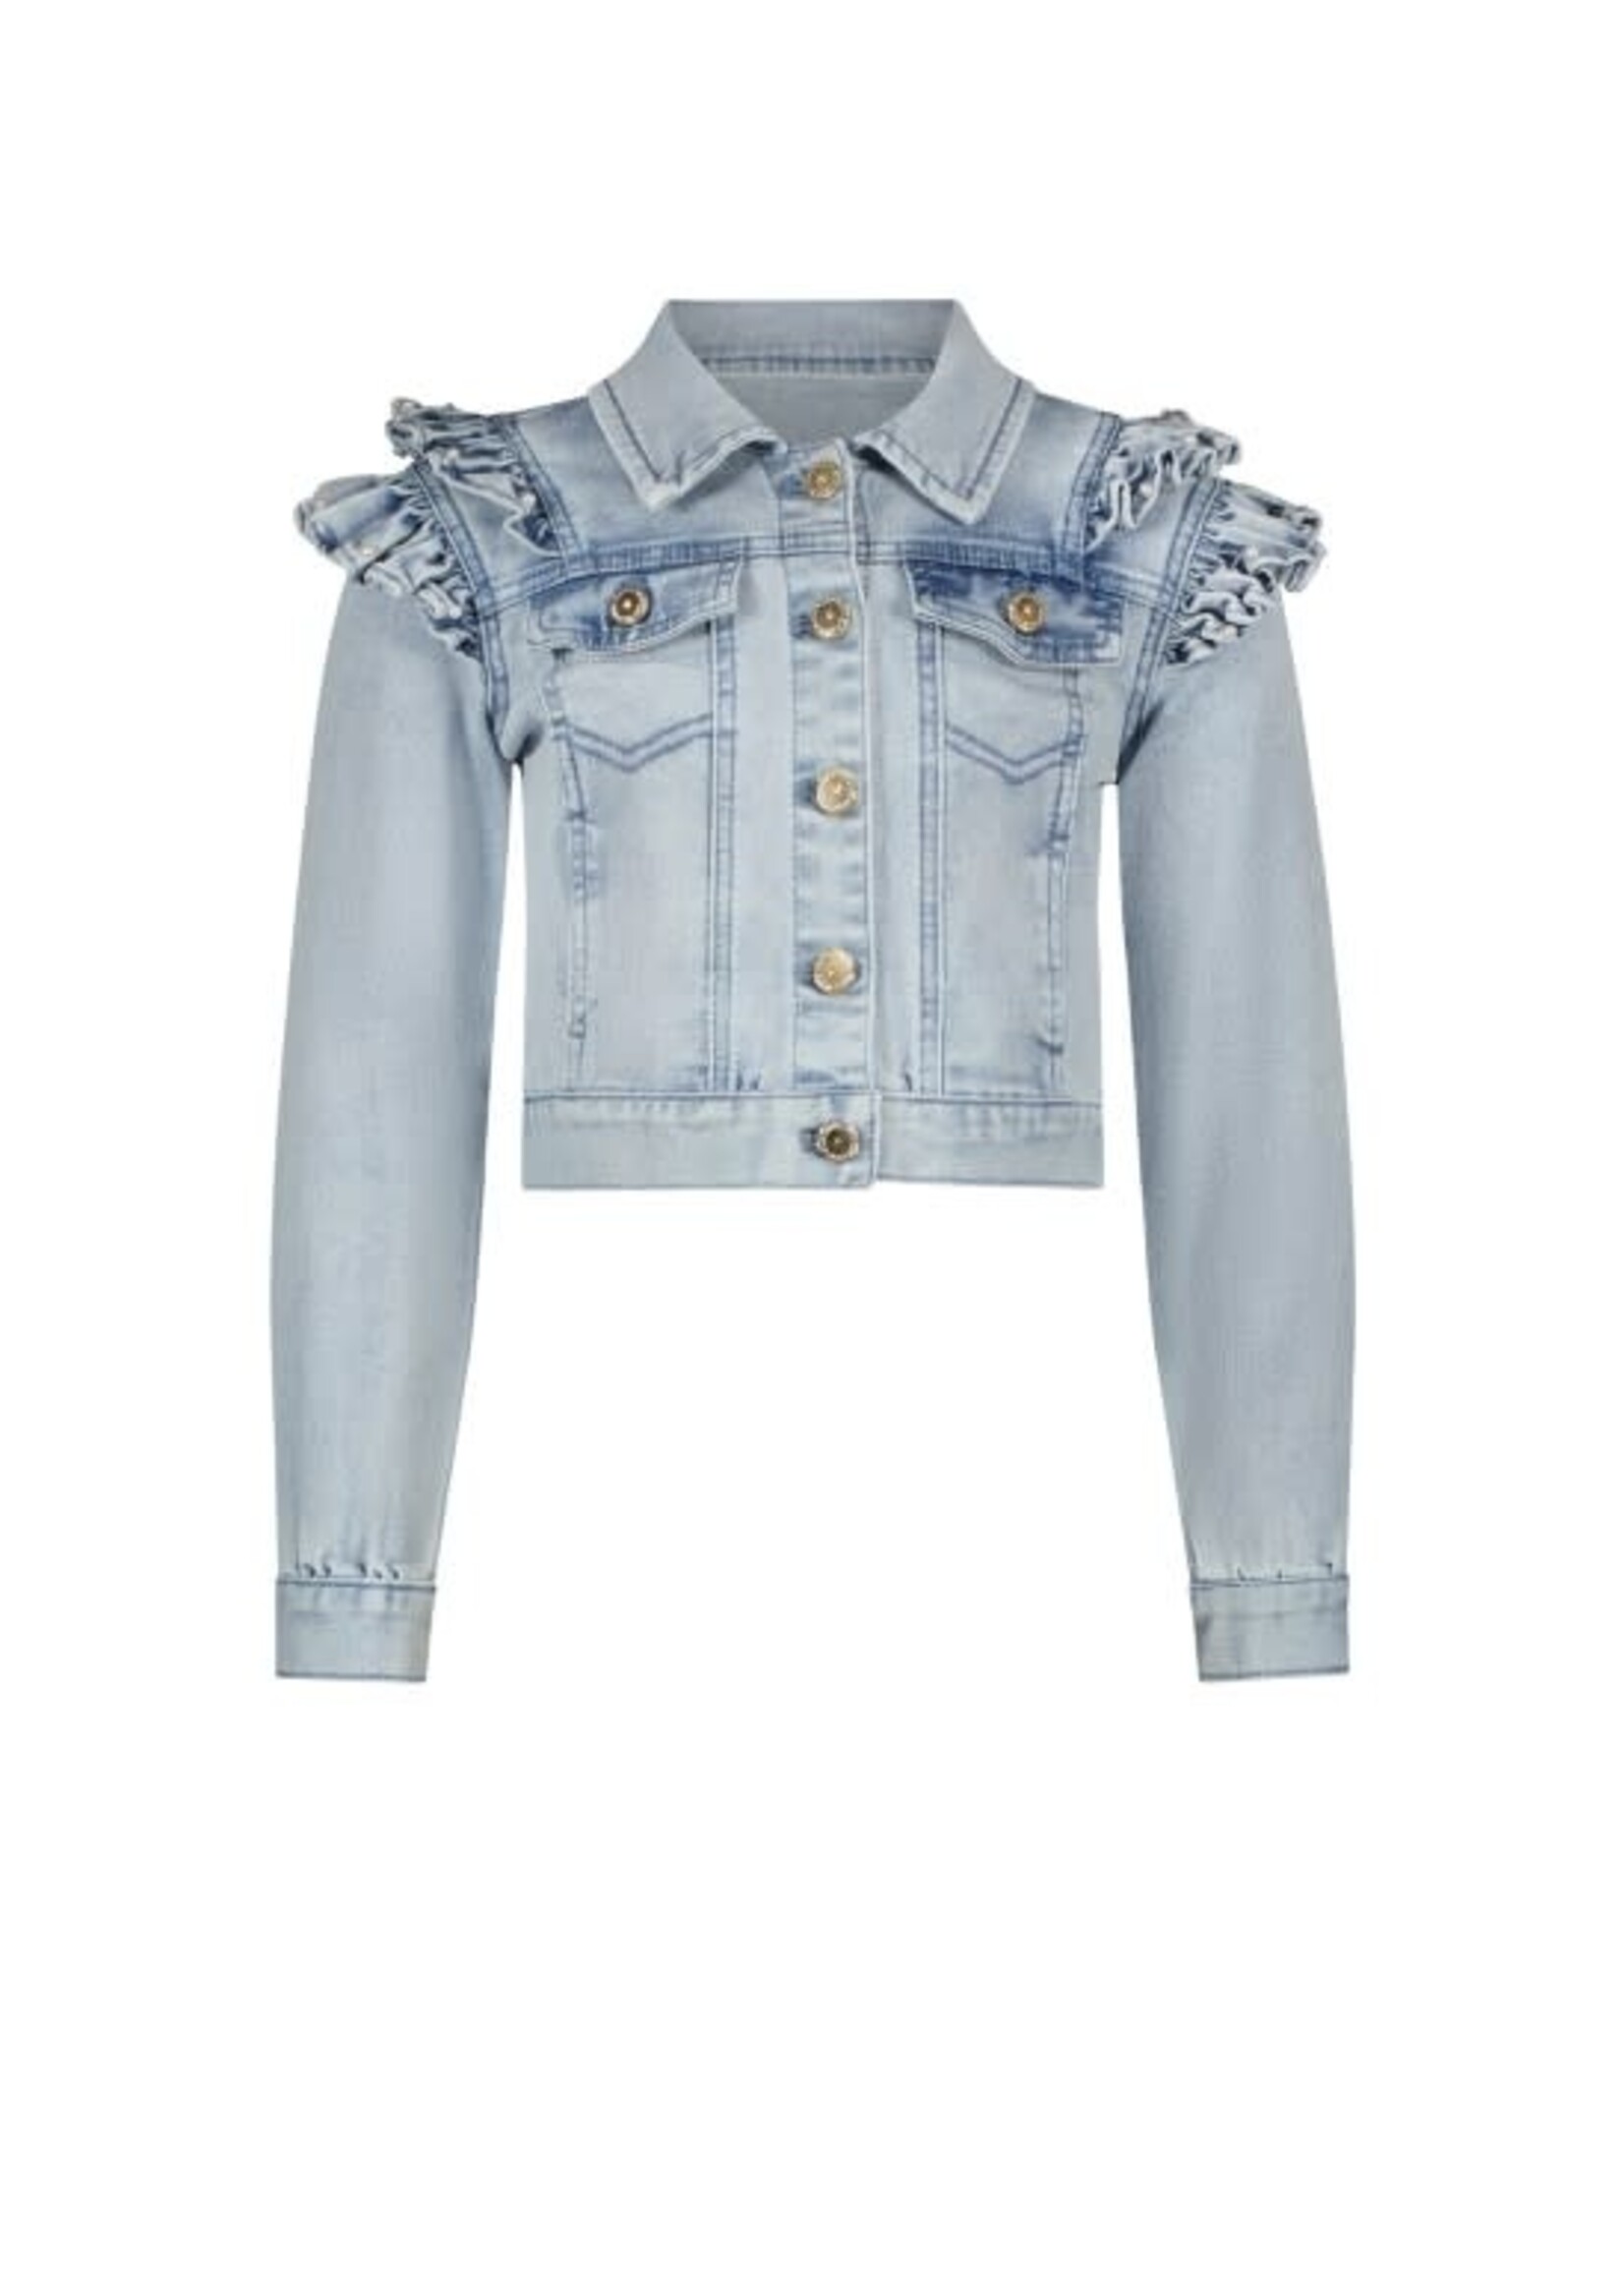 Le Chic Le Chic ALLY ruffles at armhole jacket C312-5180 Classic Light Denim